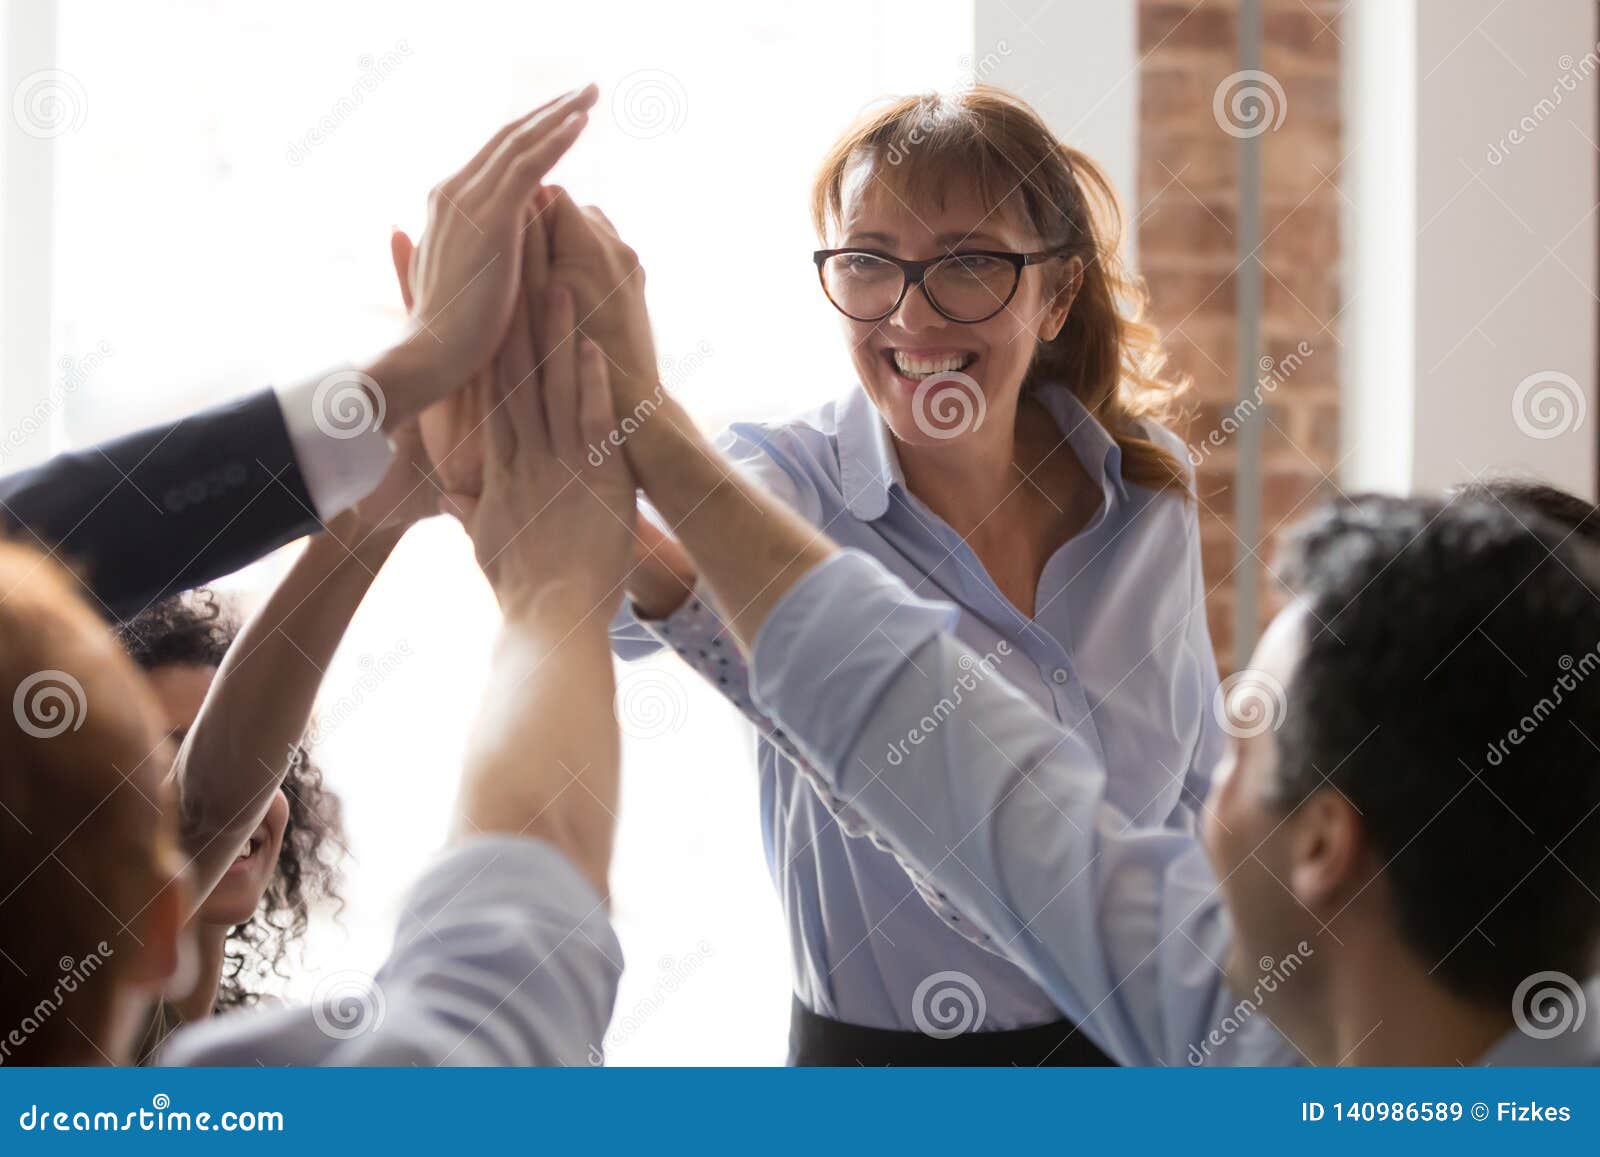 Female Teacher Give High Five To Employees Students Group Stock Image - Image cooperation, result: 140986589